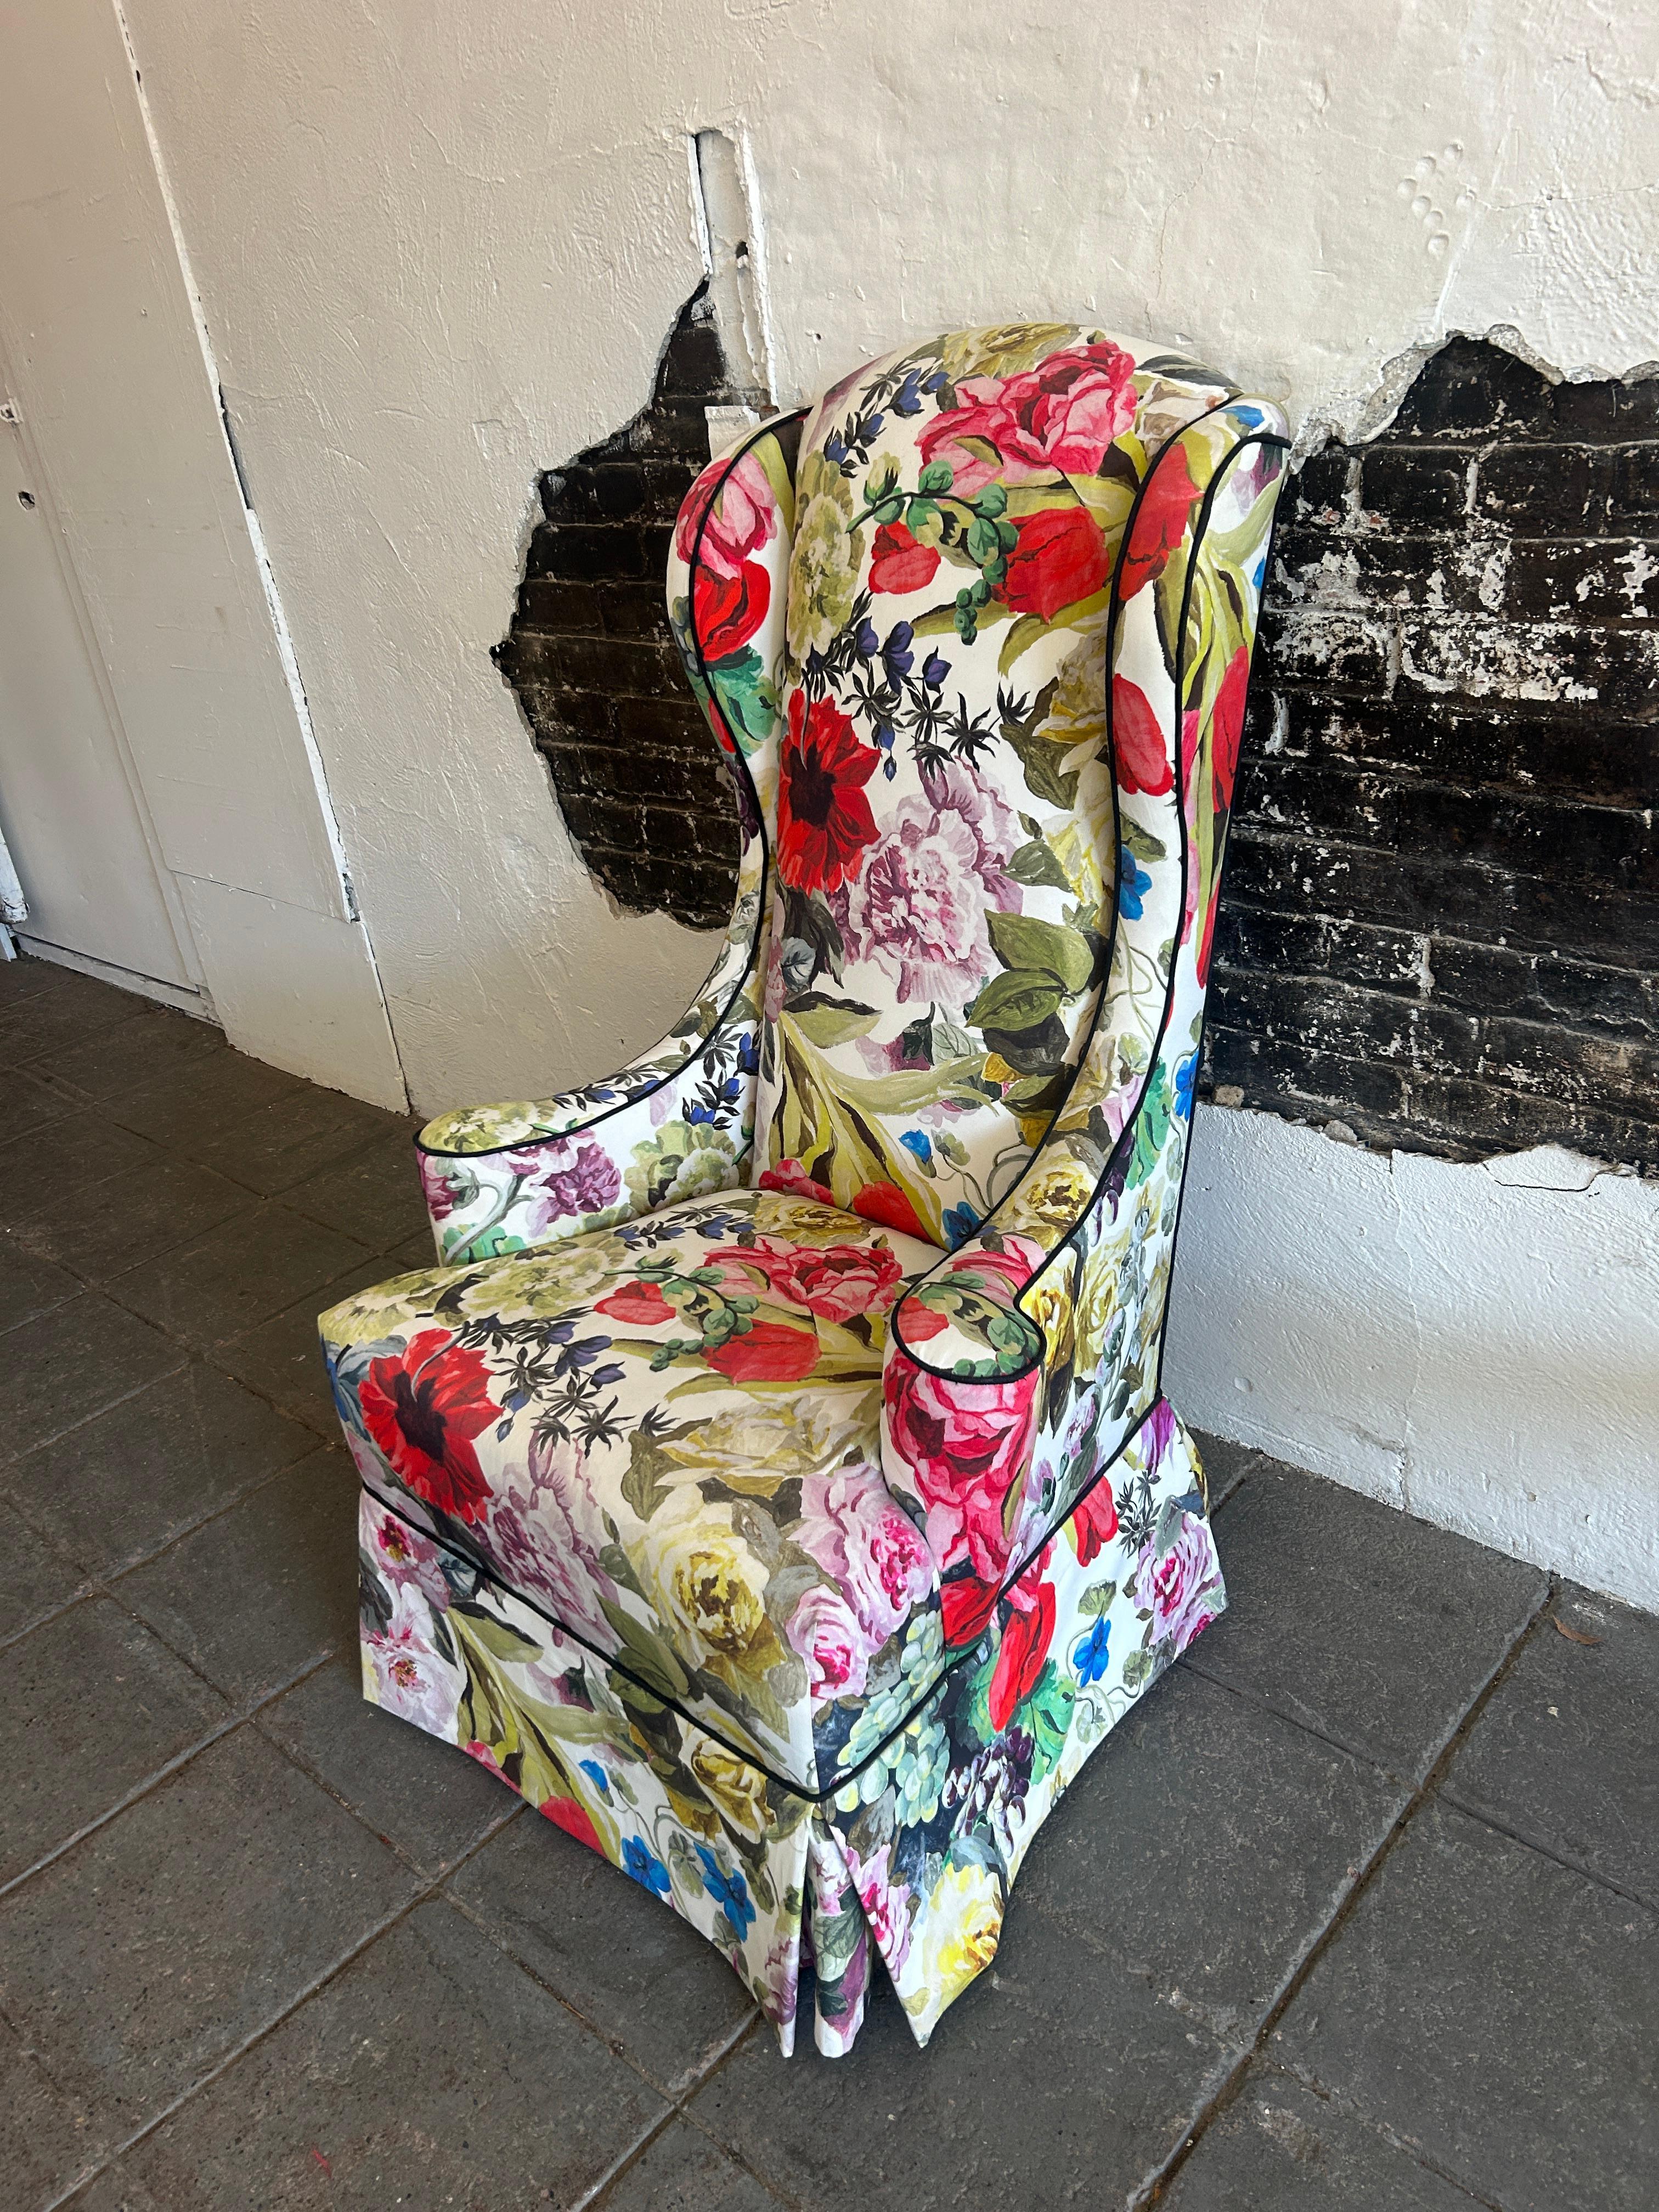 Mid century Vintage narrow tall floral wingback armchair Queen Anne style. Very vibrant watercolor floral upholstery mid century tall narrow wingback chair with lower apron that covers the legs. Very clean chair with black fabric piping. Located in